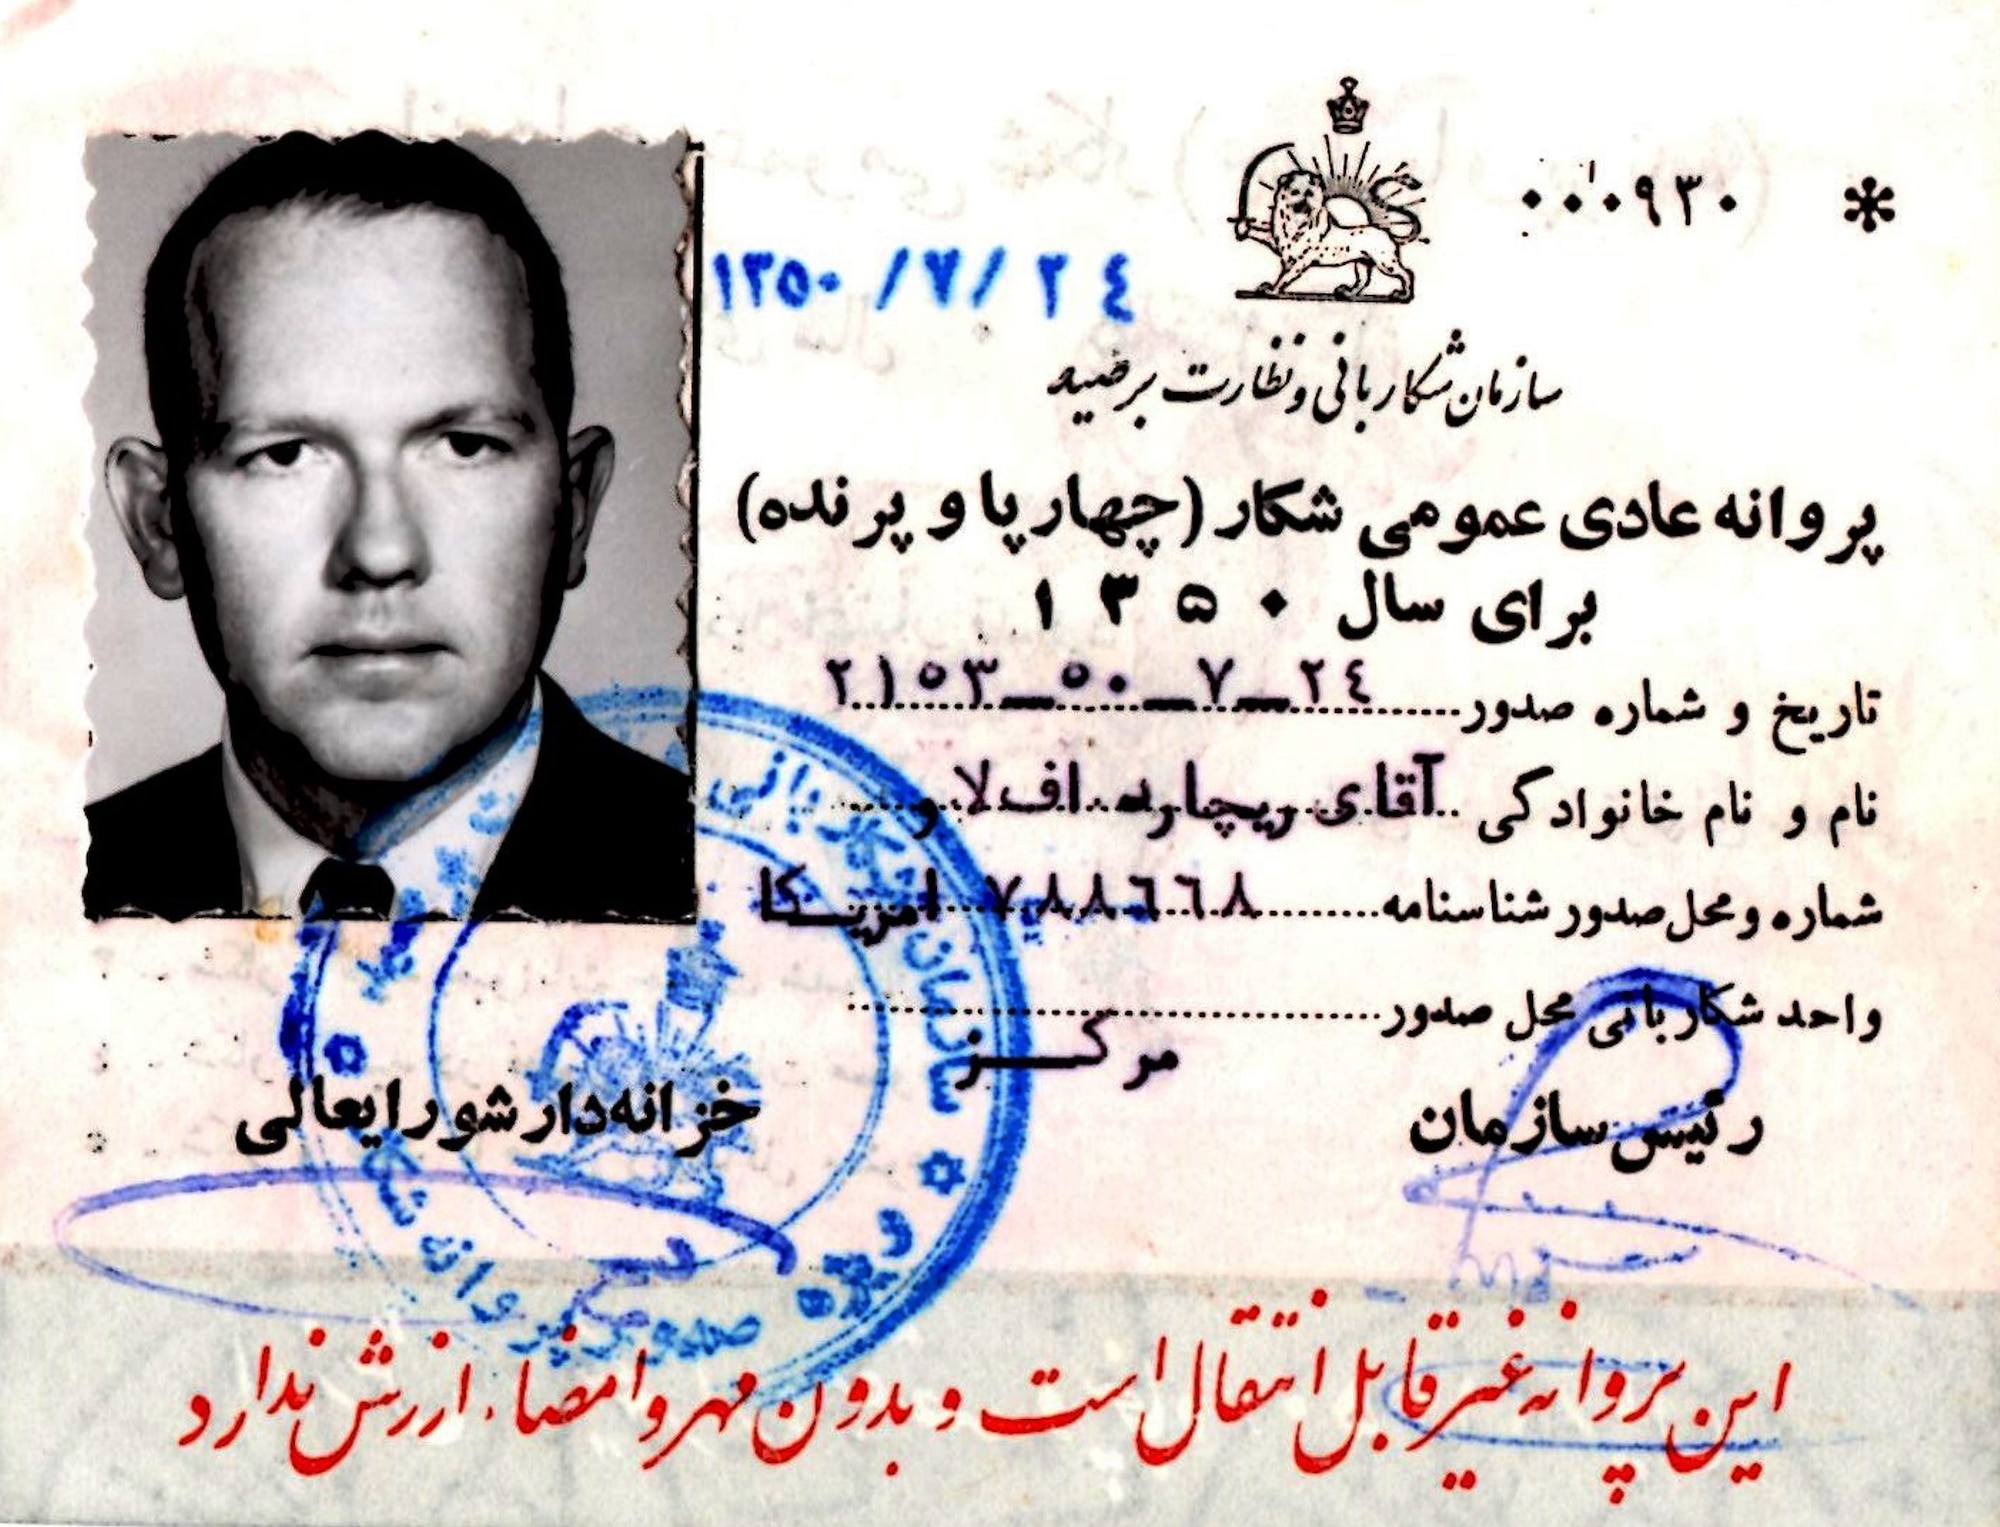 Air Force Office of Special Investigations Special Agent Richard F. Law's identification card from his Iran tour. (Courtesy photo)